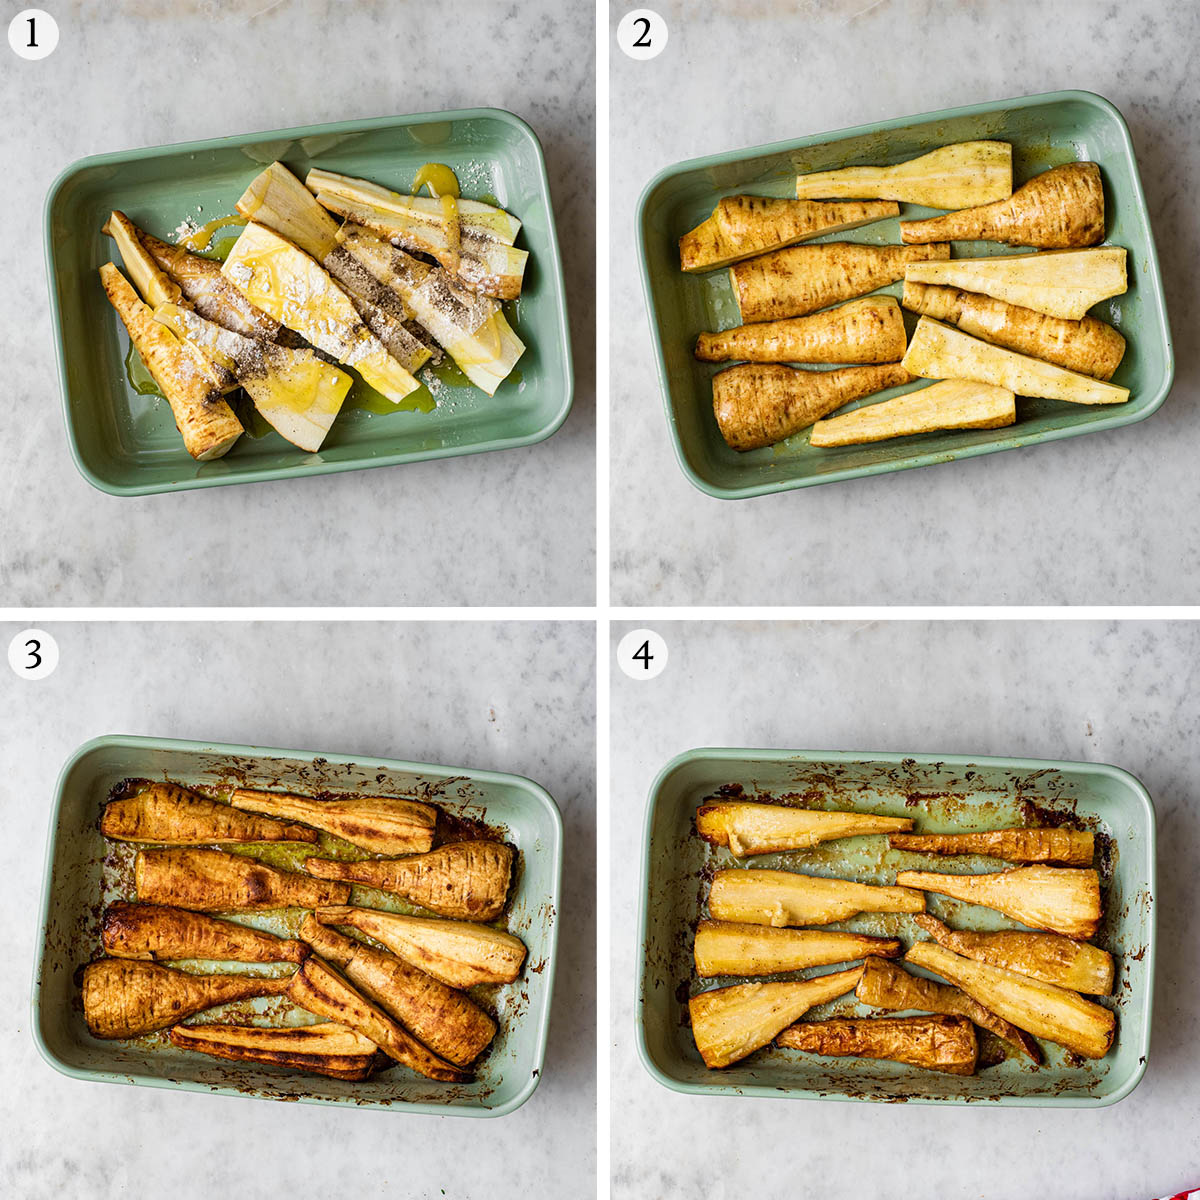 Roasted parsnips steps 1 to 4, seasoning and cooking.